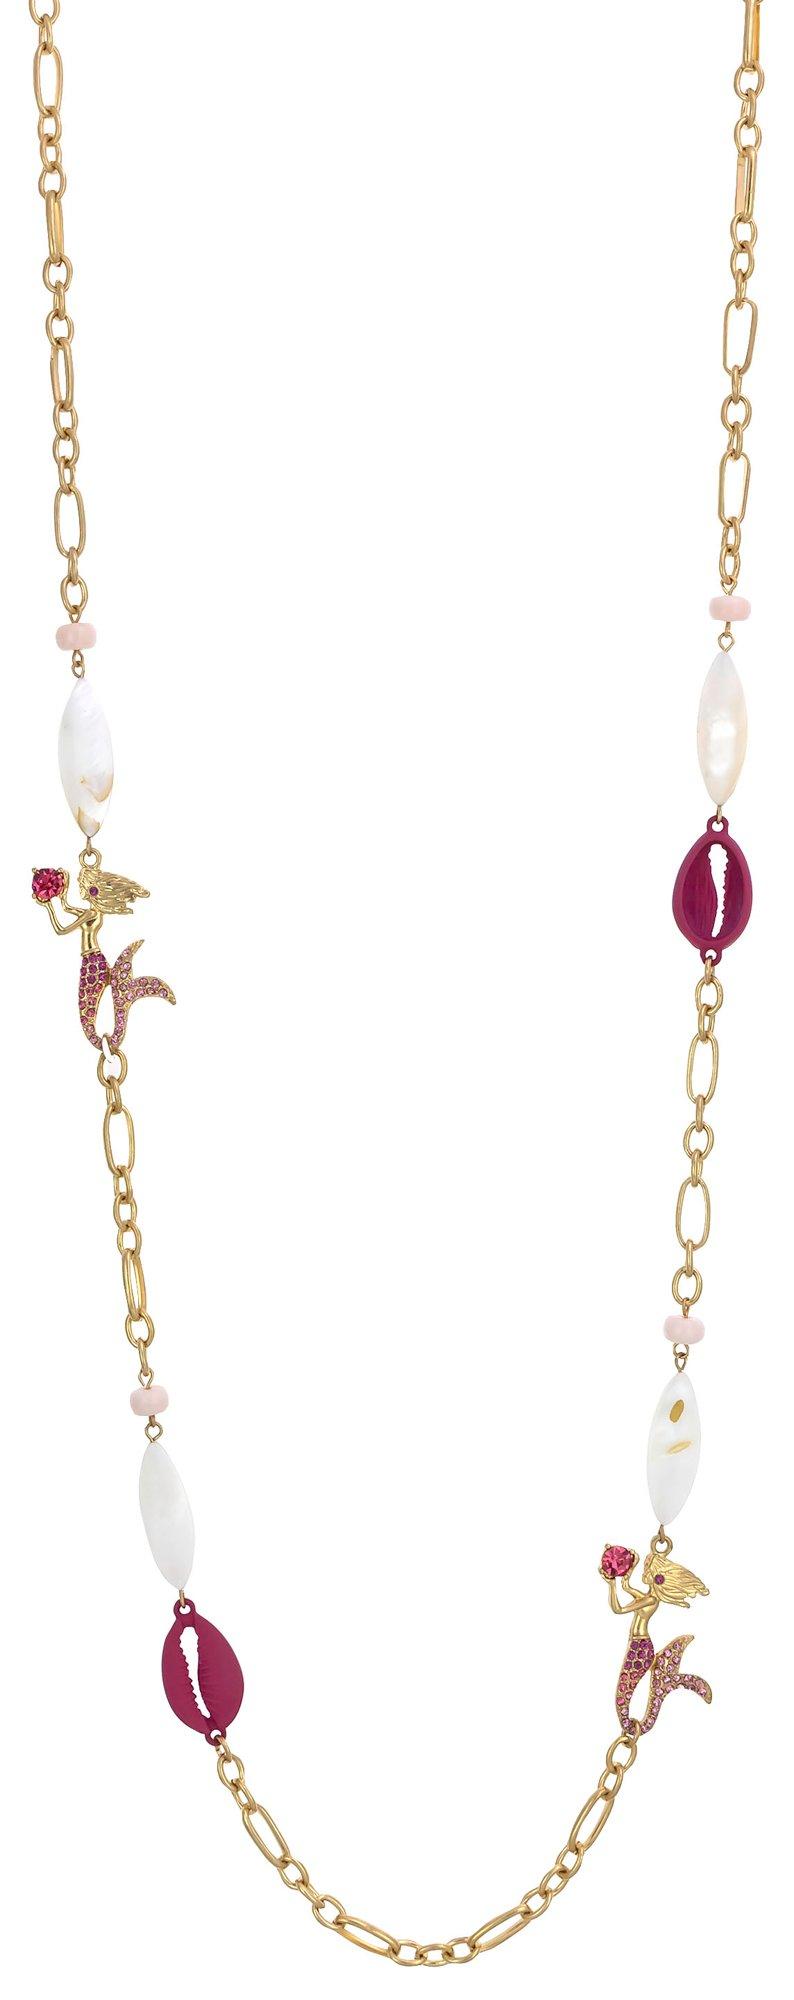 Bay Studio 36 In. Mermaids & Shell Charms Necklace